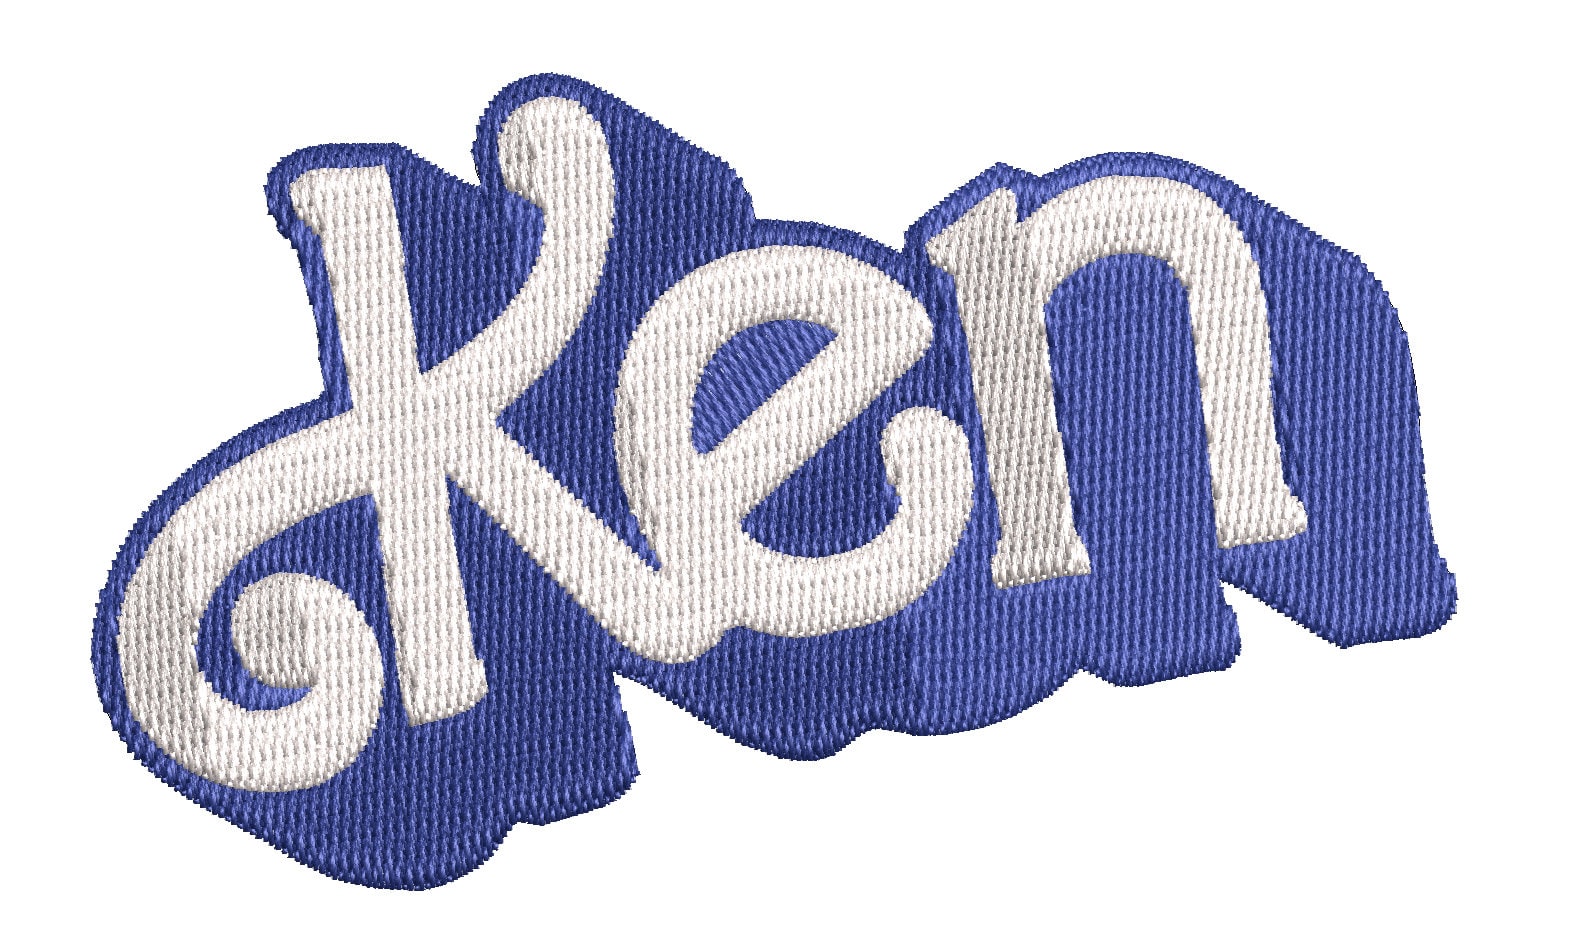 Set of 2 Barbie and Ken Name Tags Embroidered Iron on Uniform